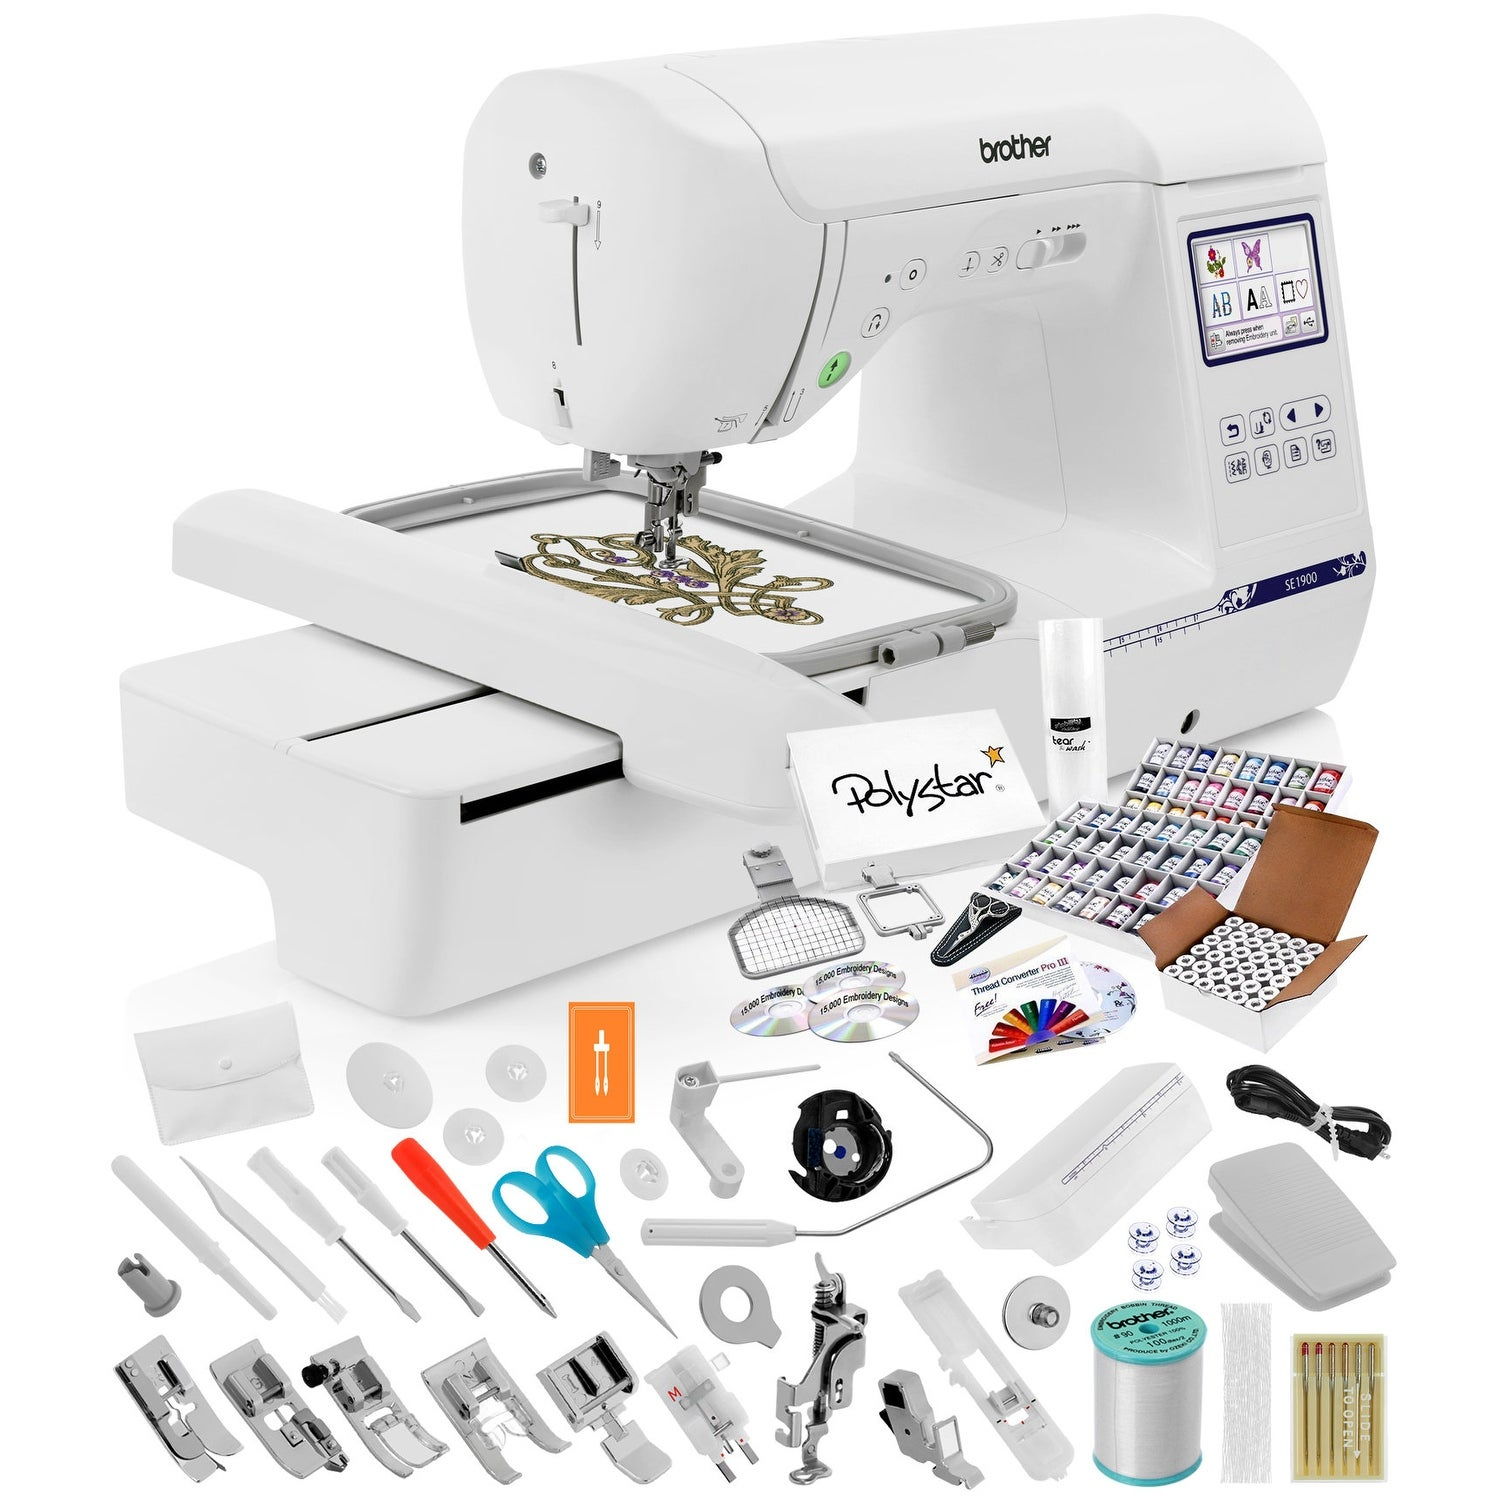 Brother Se400 Embroidery Patterns Brother Se1900 Sewing And Embroidery Machine W Grand Slam Package Includes 64 Embroidery Threads Prewound Bobbins More